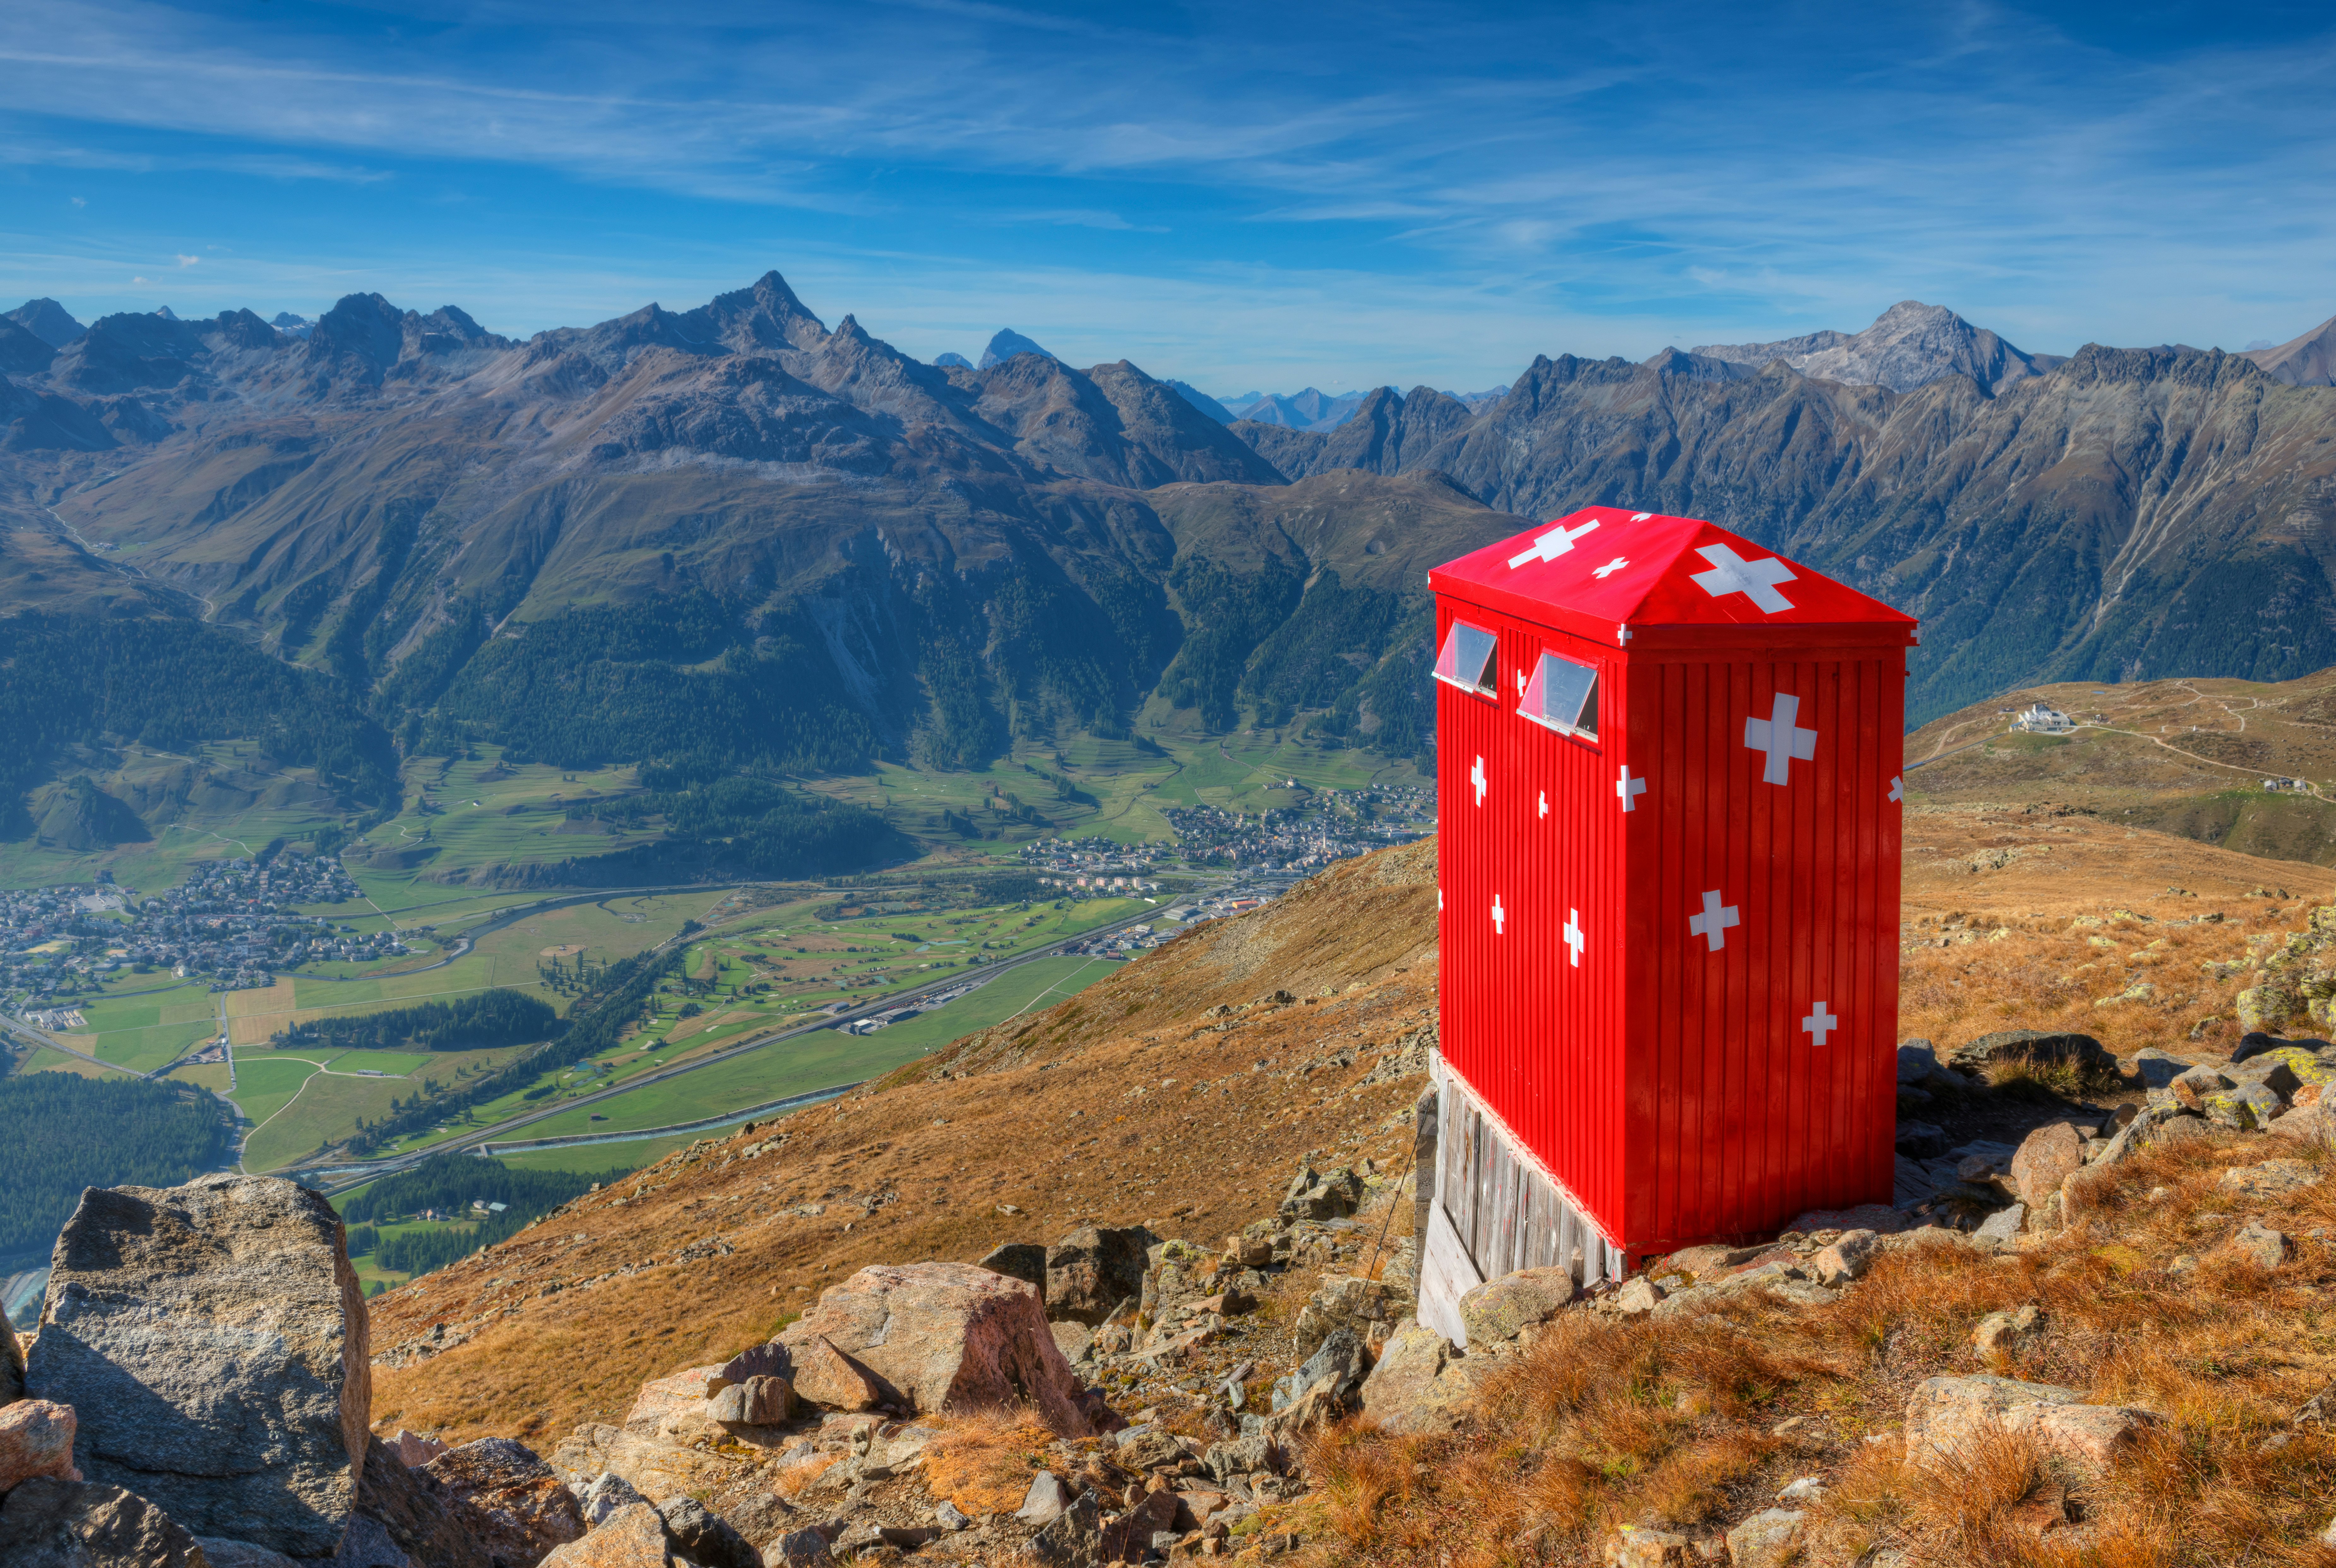 A red toilet overlooking a deep valley